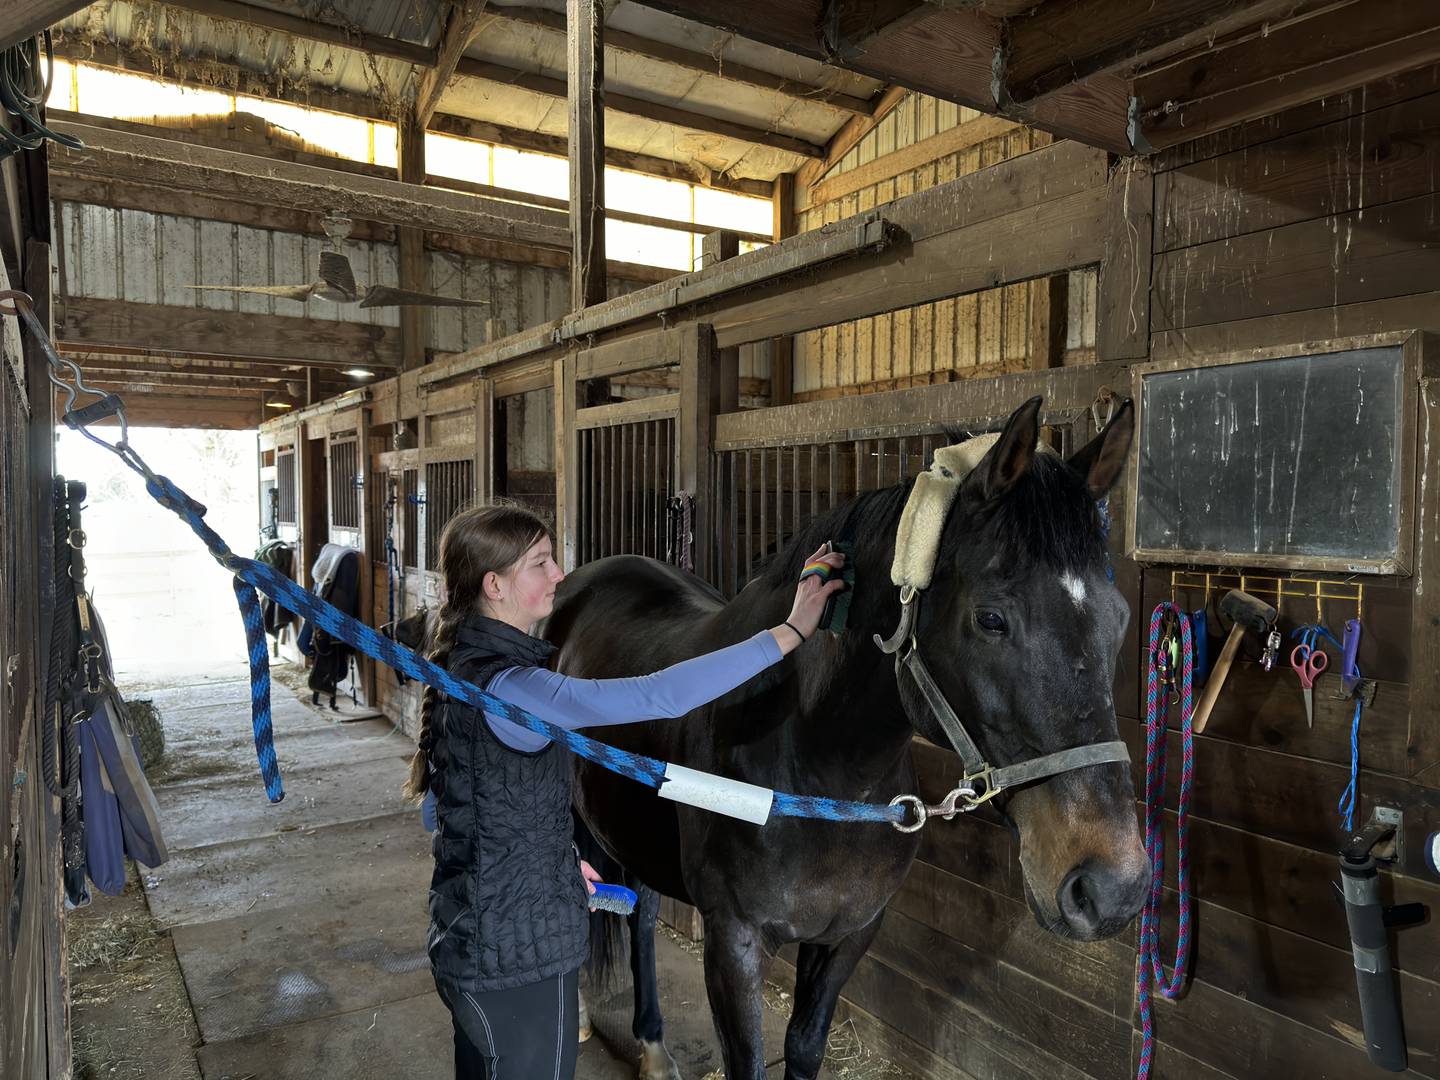 Brushing horses is one of the daily chores Emma Bialko does at the three equestrian facilities where she works for her FFA project.